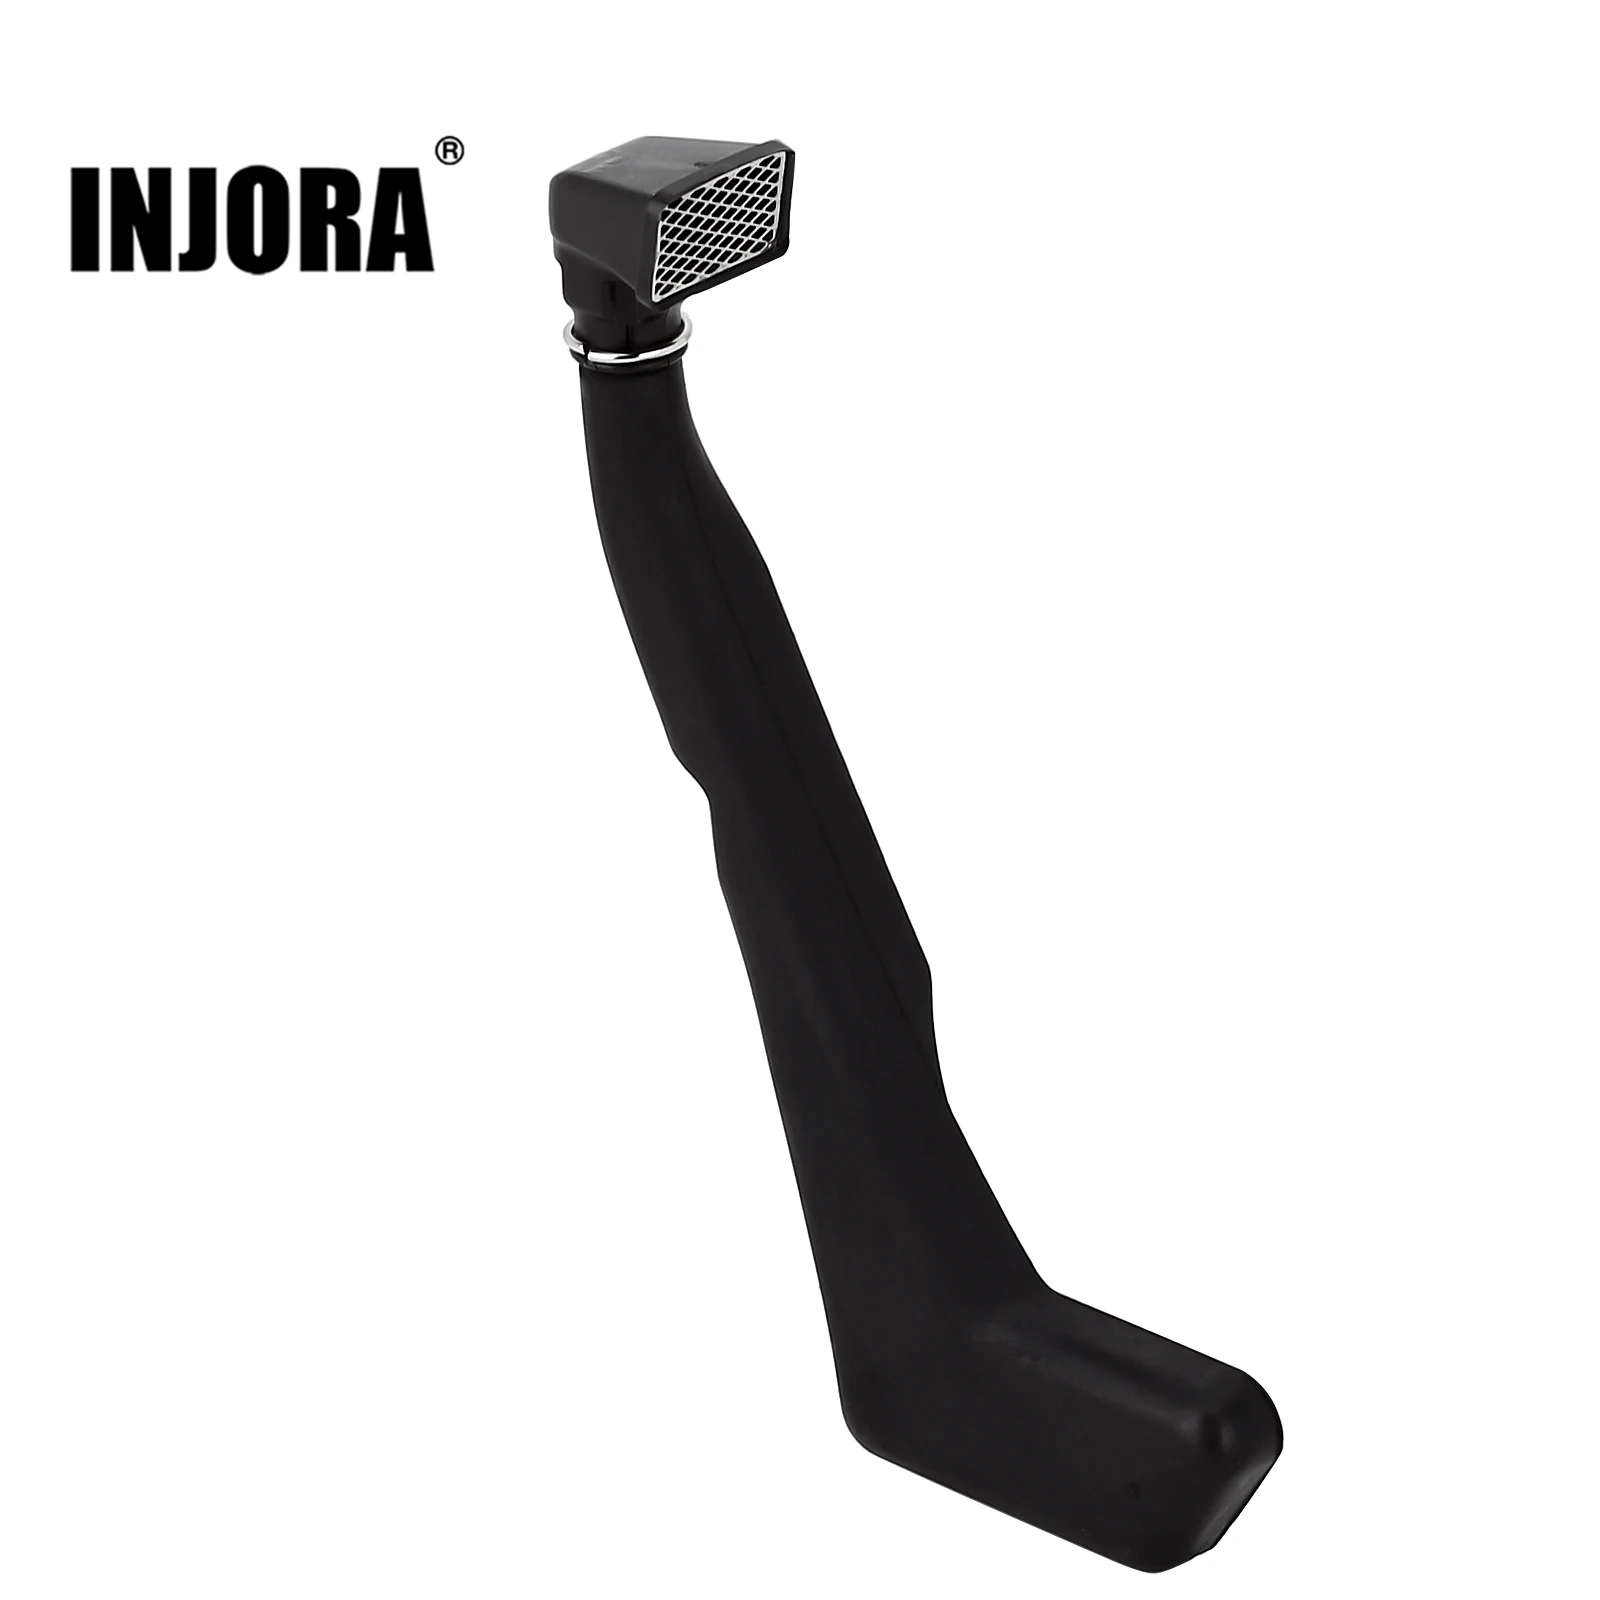 INJORA 1:10 RC Crawler Black Soft Rubber Snorkel for Axial SCX10 D90 Jeep Wrangler Body Shell